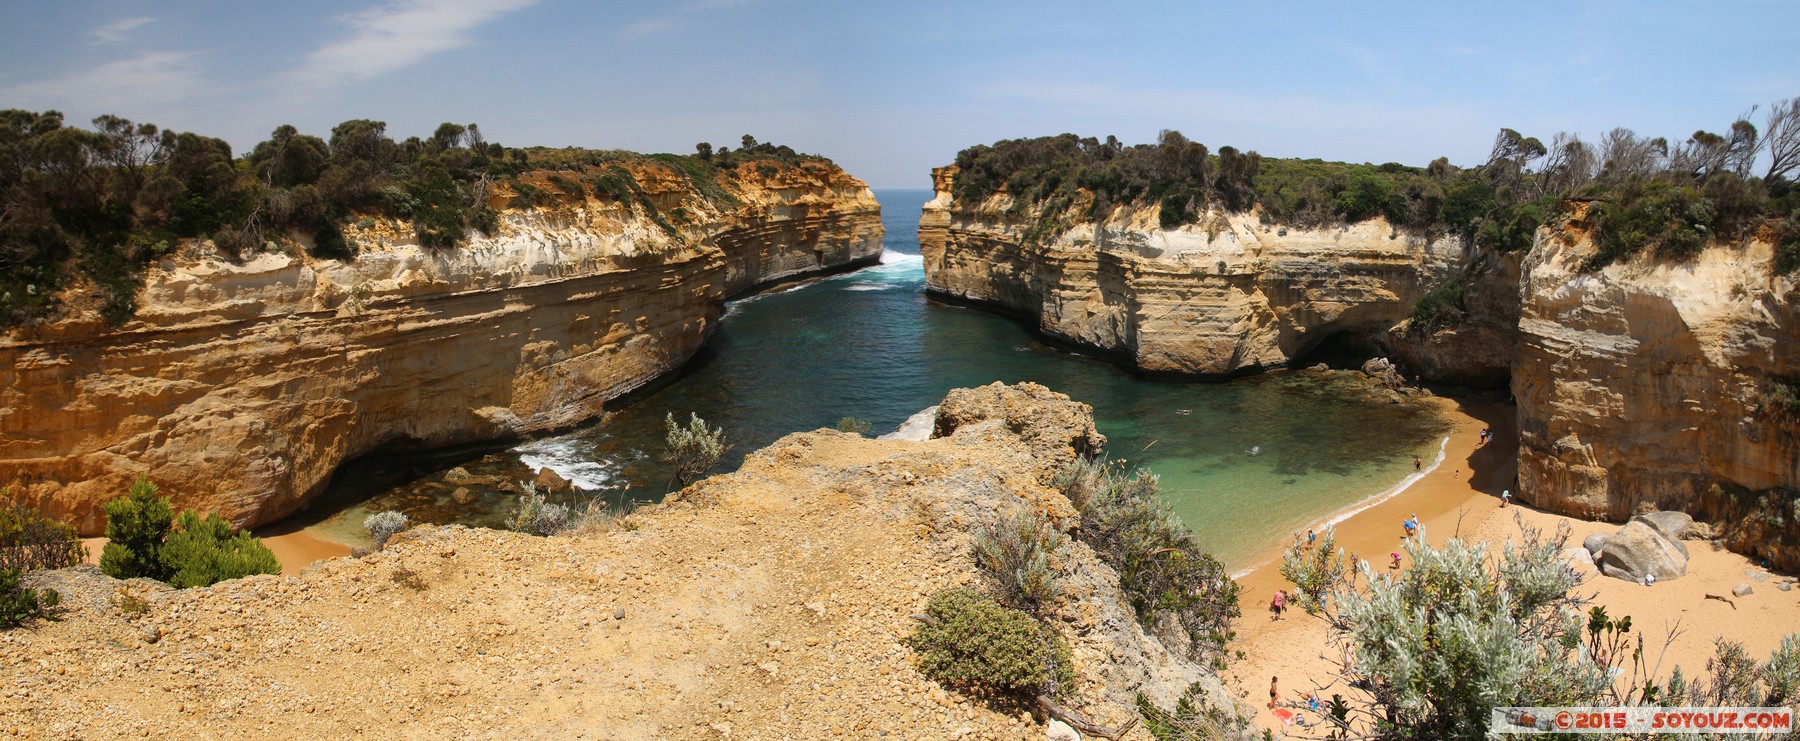 Great Ocean Road - Loch Ard Gorge - Panorama
Stitched Panorama
Mots-clés: AUS Australie geo:lat=-38.64644769 geo:lon=143.07075131 geotagged Port Campbell Victoria Waarre mer Loch Ard Gorge panorama plage